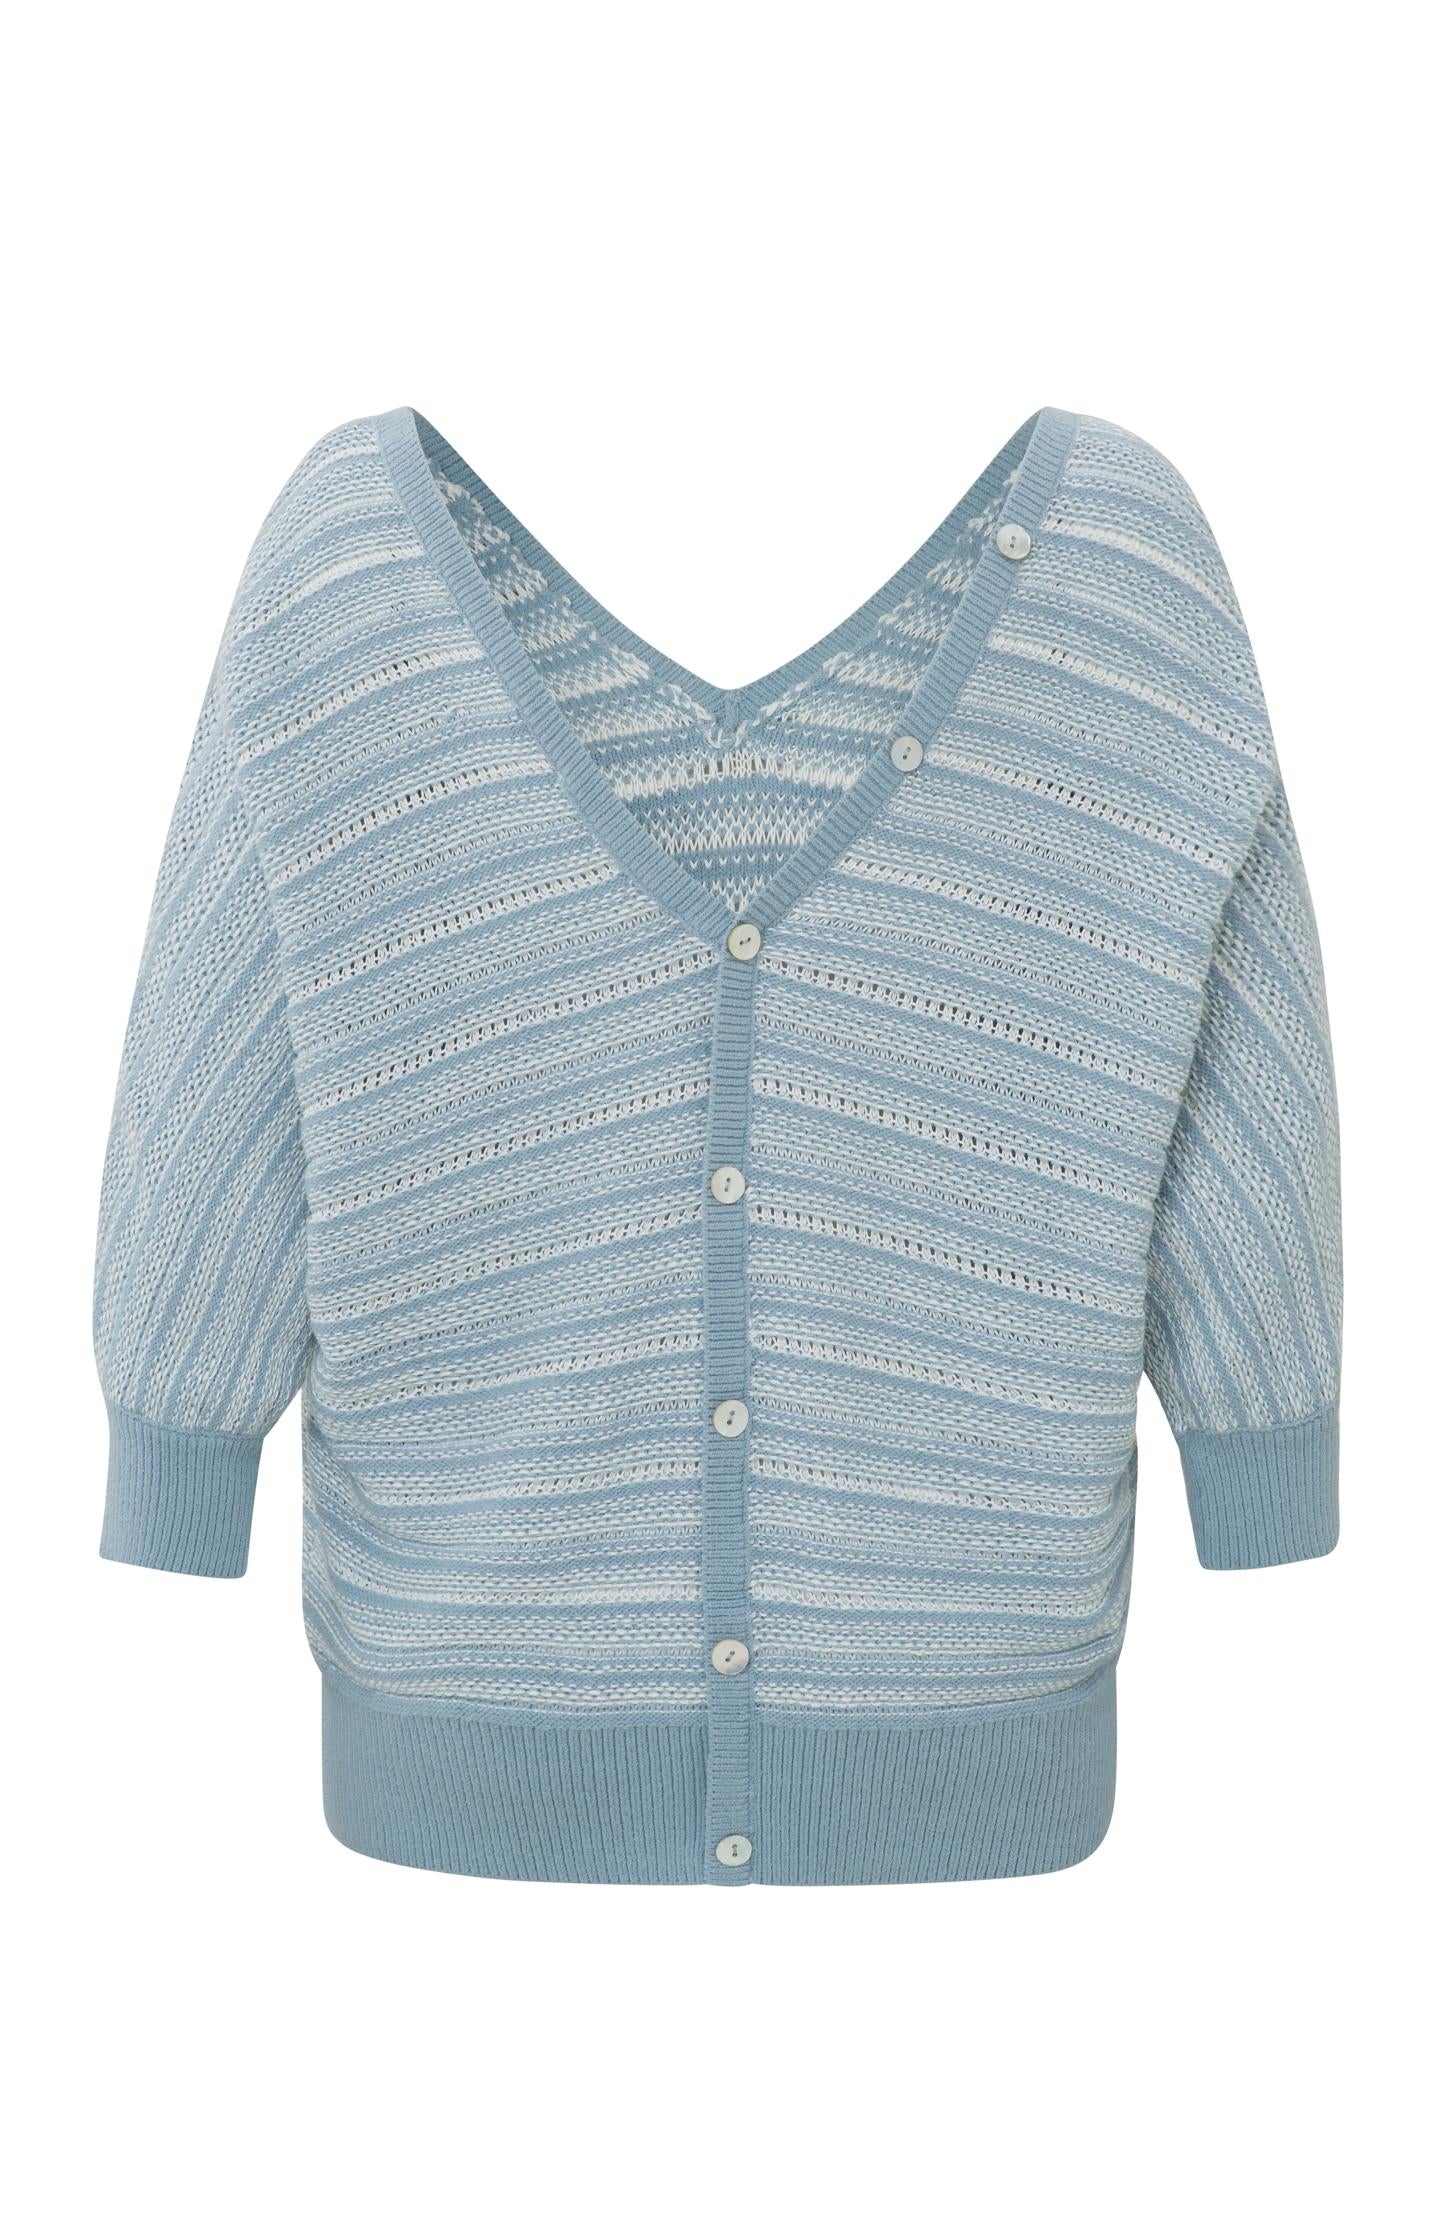 Double V-neck sweater with long sleeves and striped pattern